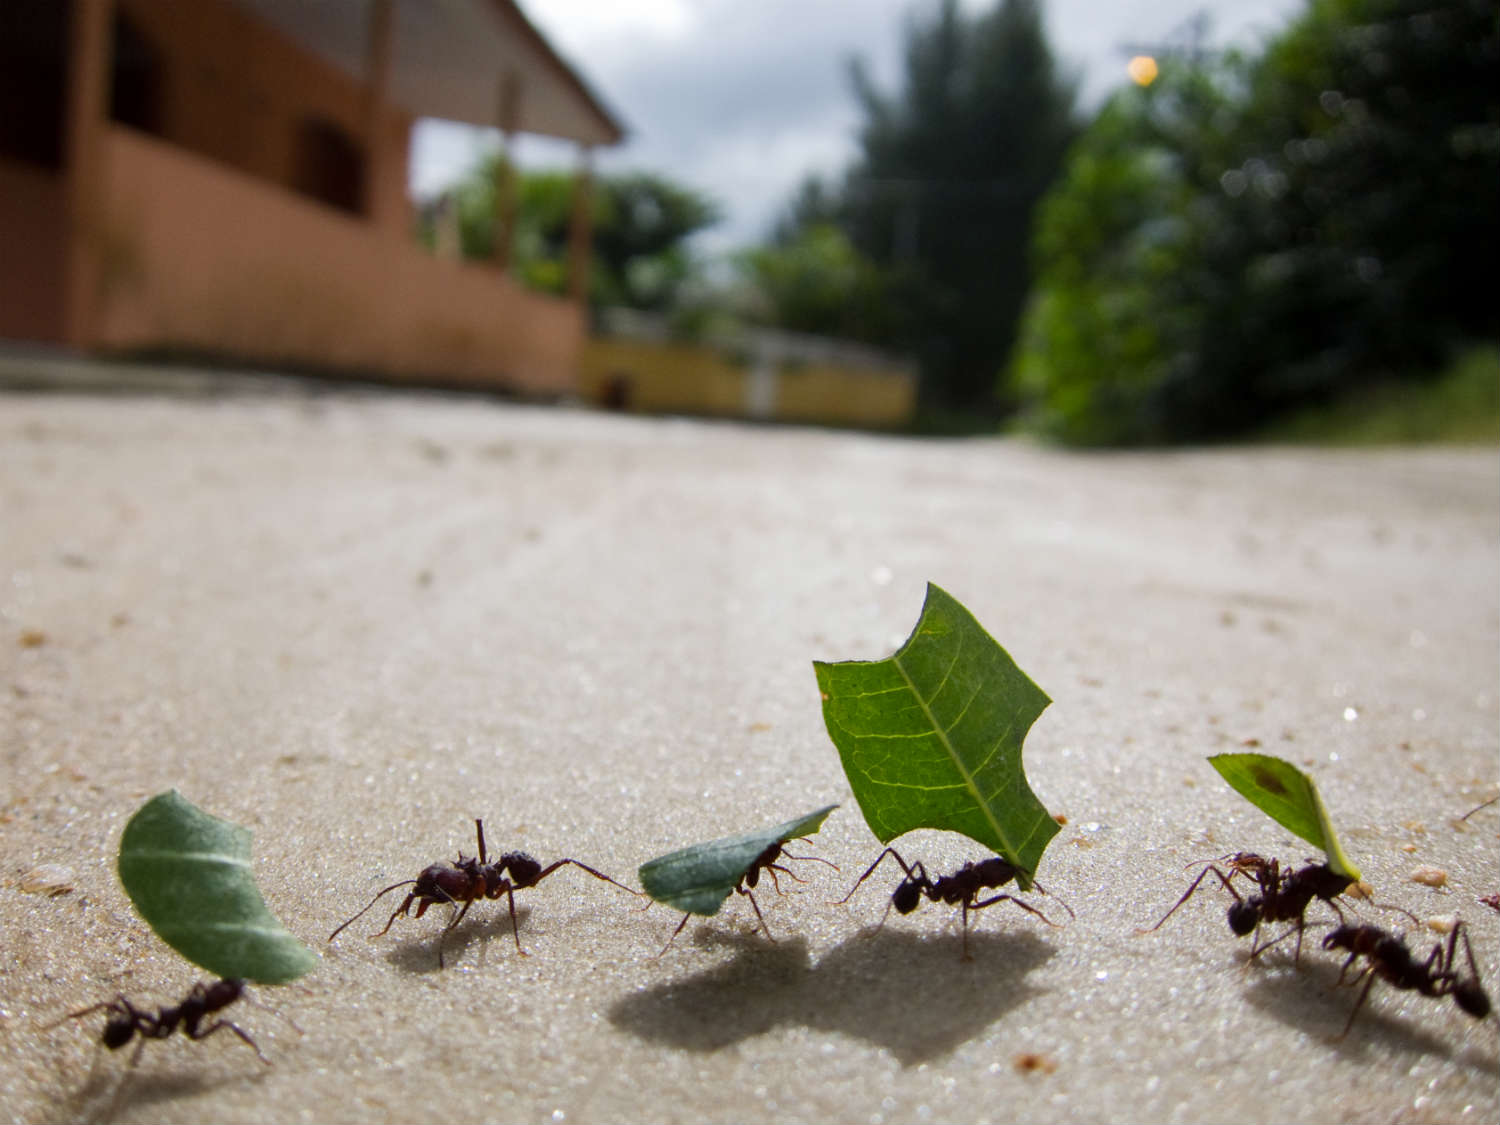 As a collective, ants are efficient and surprisingly intelligent (Moment Select via Getty Images)